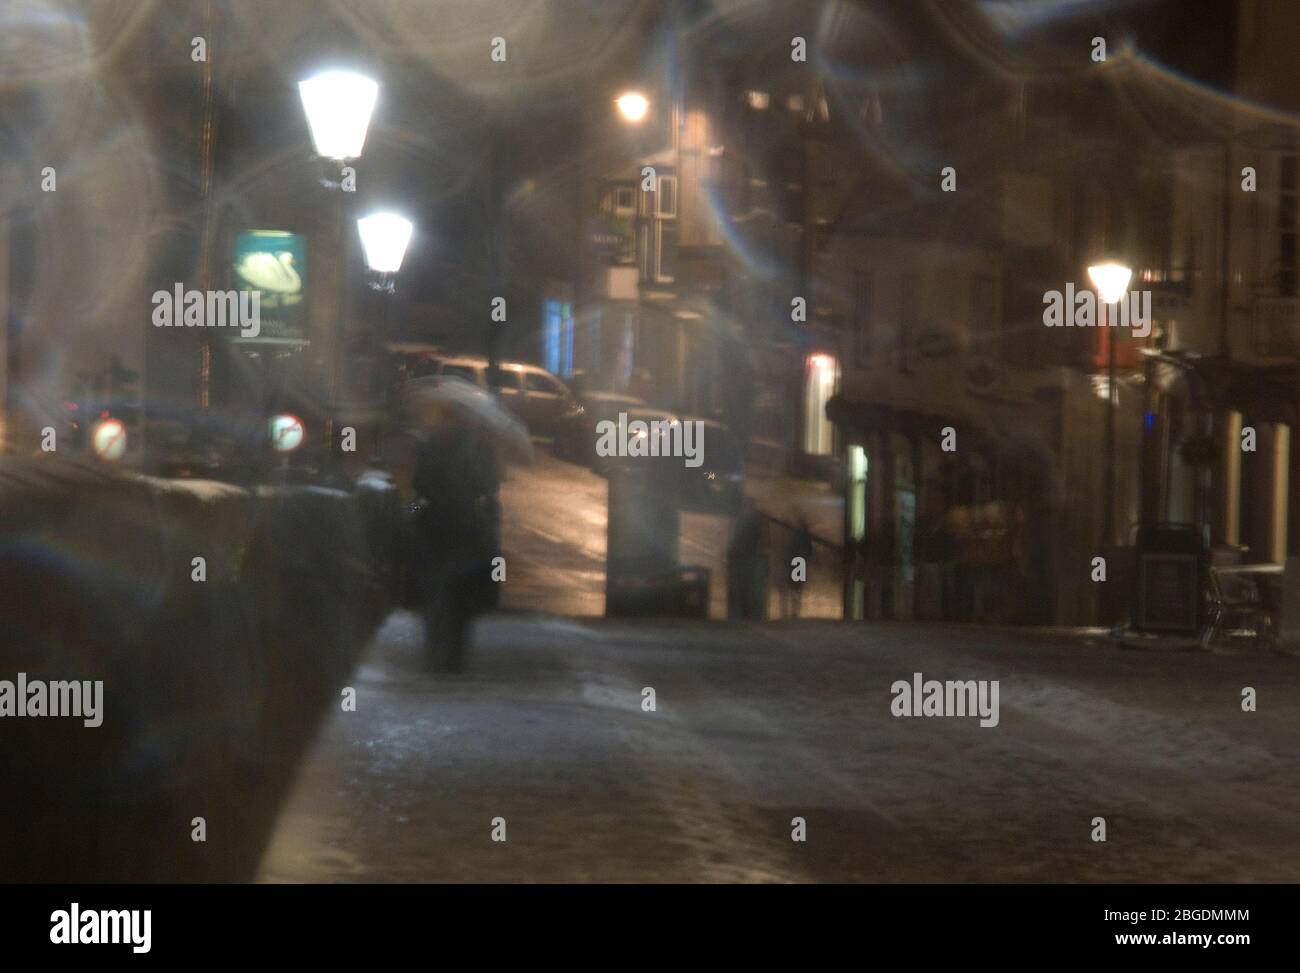 An atmospheric image of people caught in heavy rain on a pedestrian area at night with street lights casting an eerie glow Stock Photo